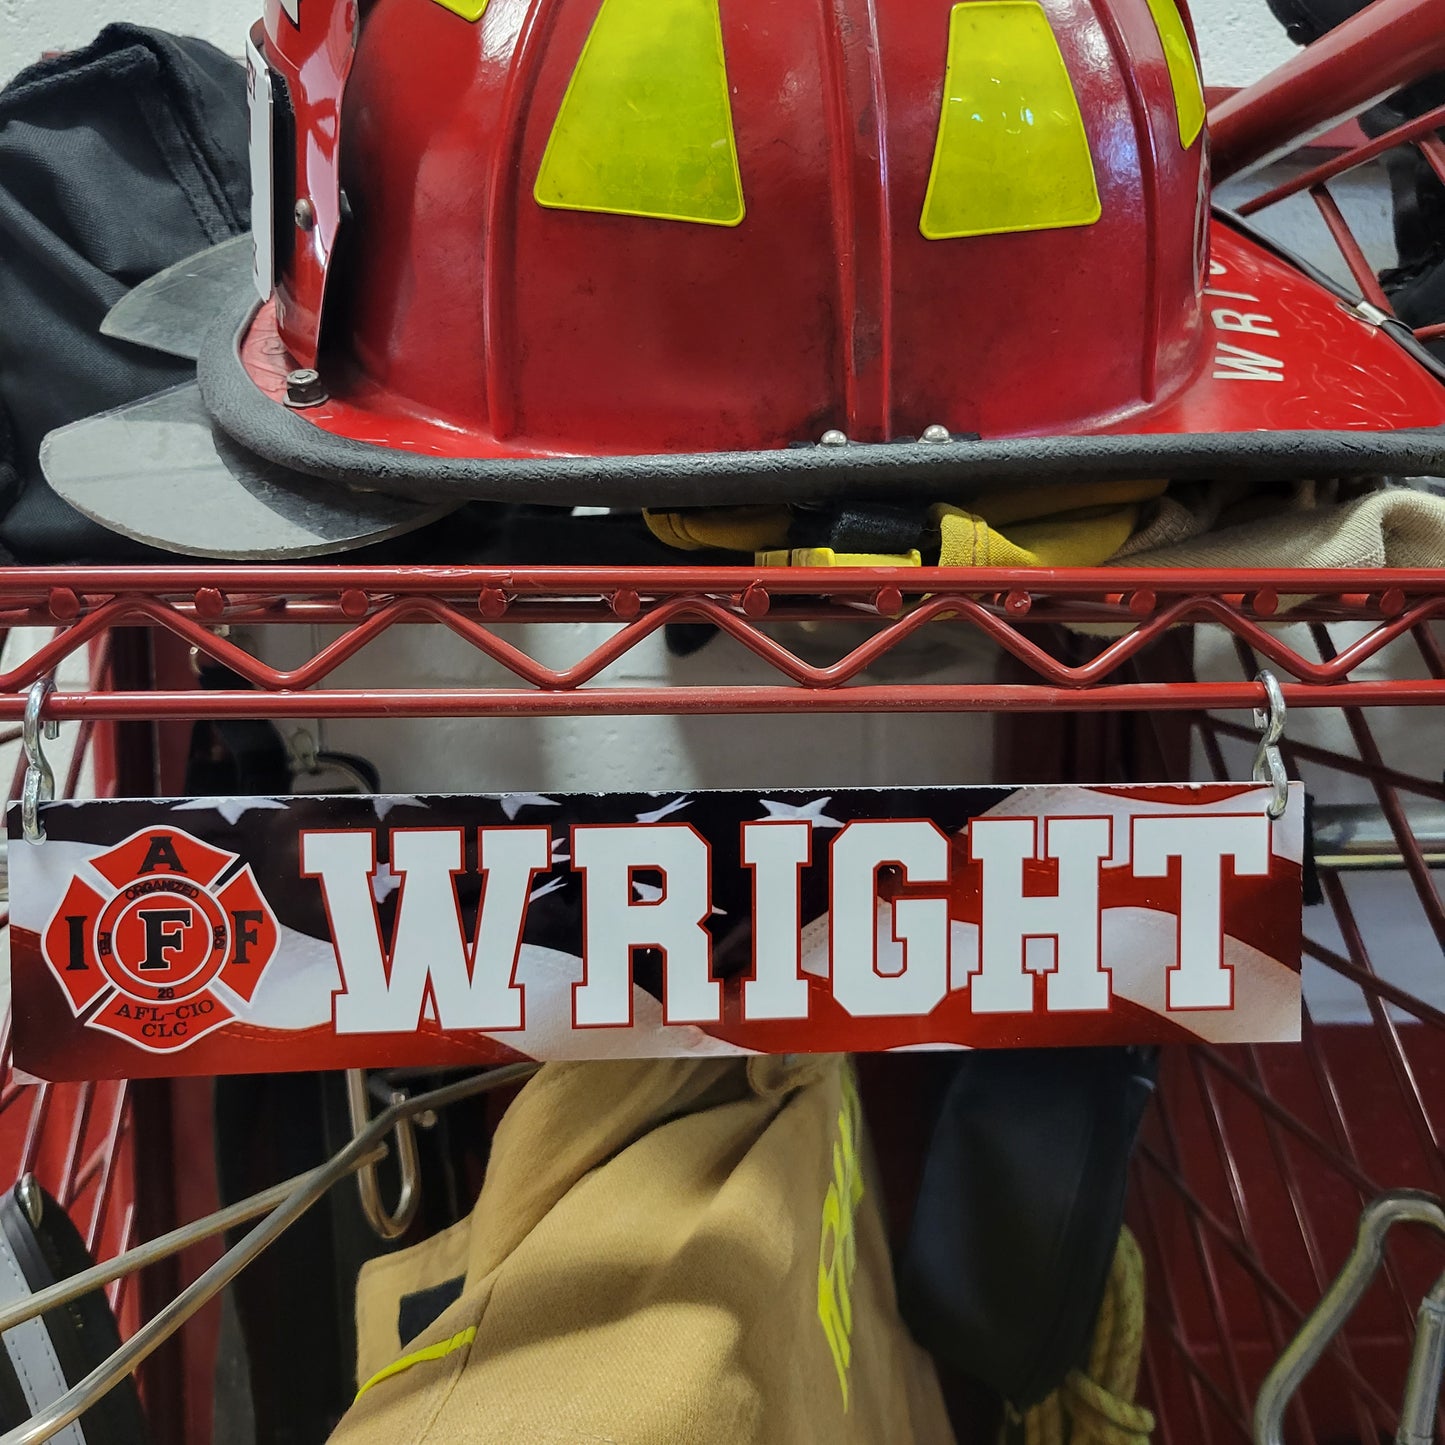 Turnout gear name plate